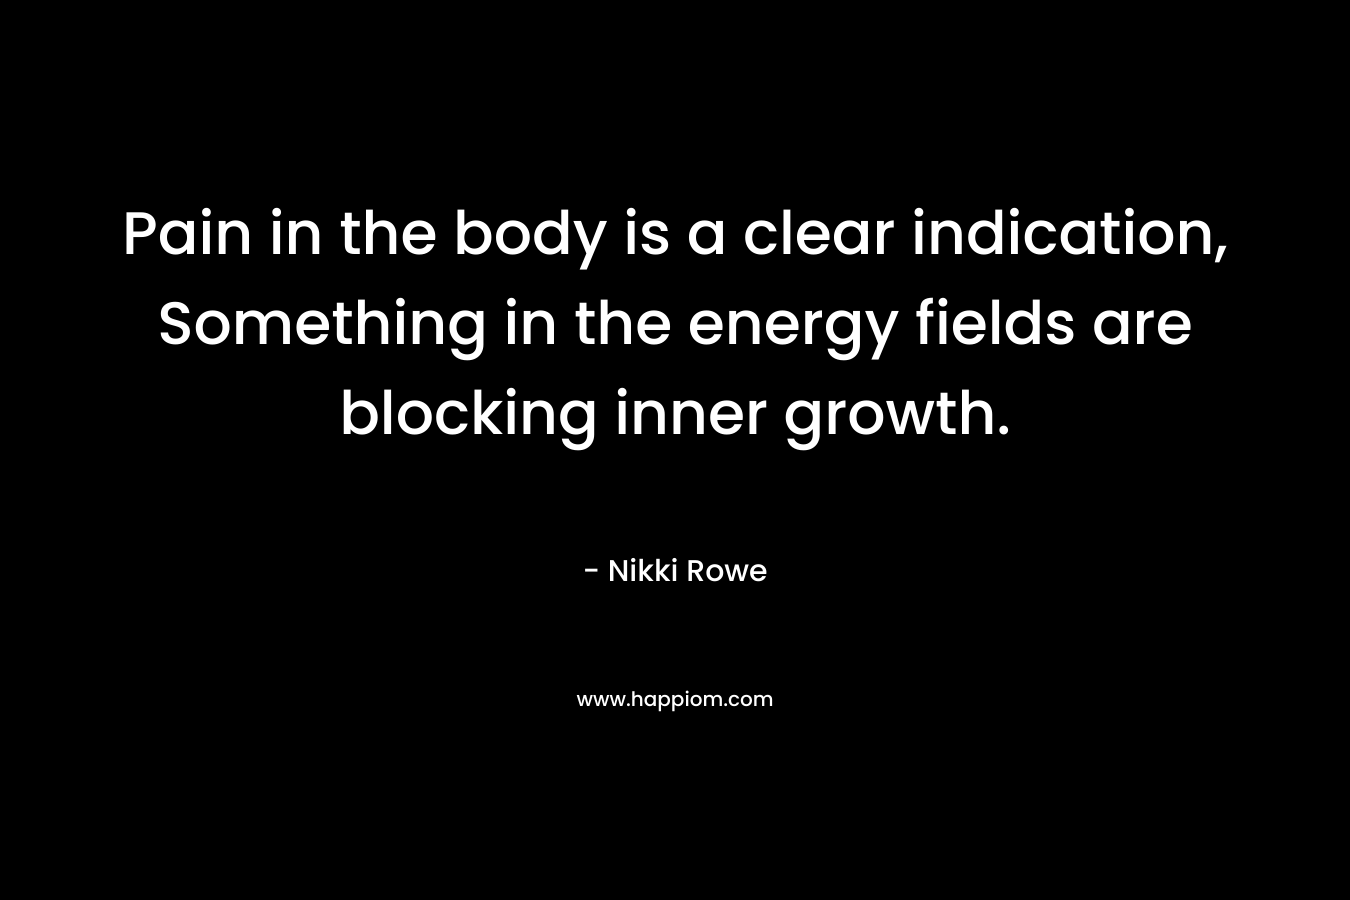 Pain in the body is a clear indication, Something in the energy fields are blocking inner growth. – Nikki Rowe